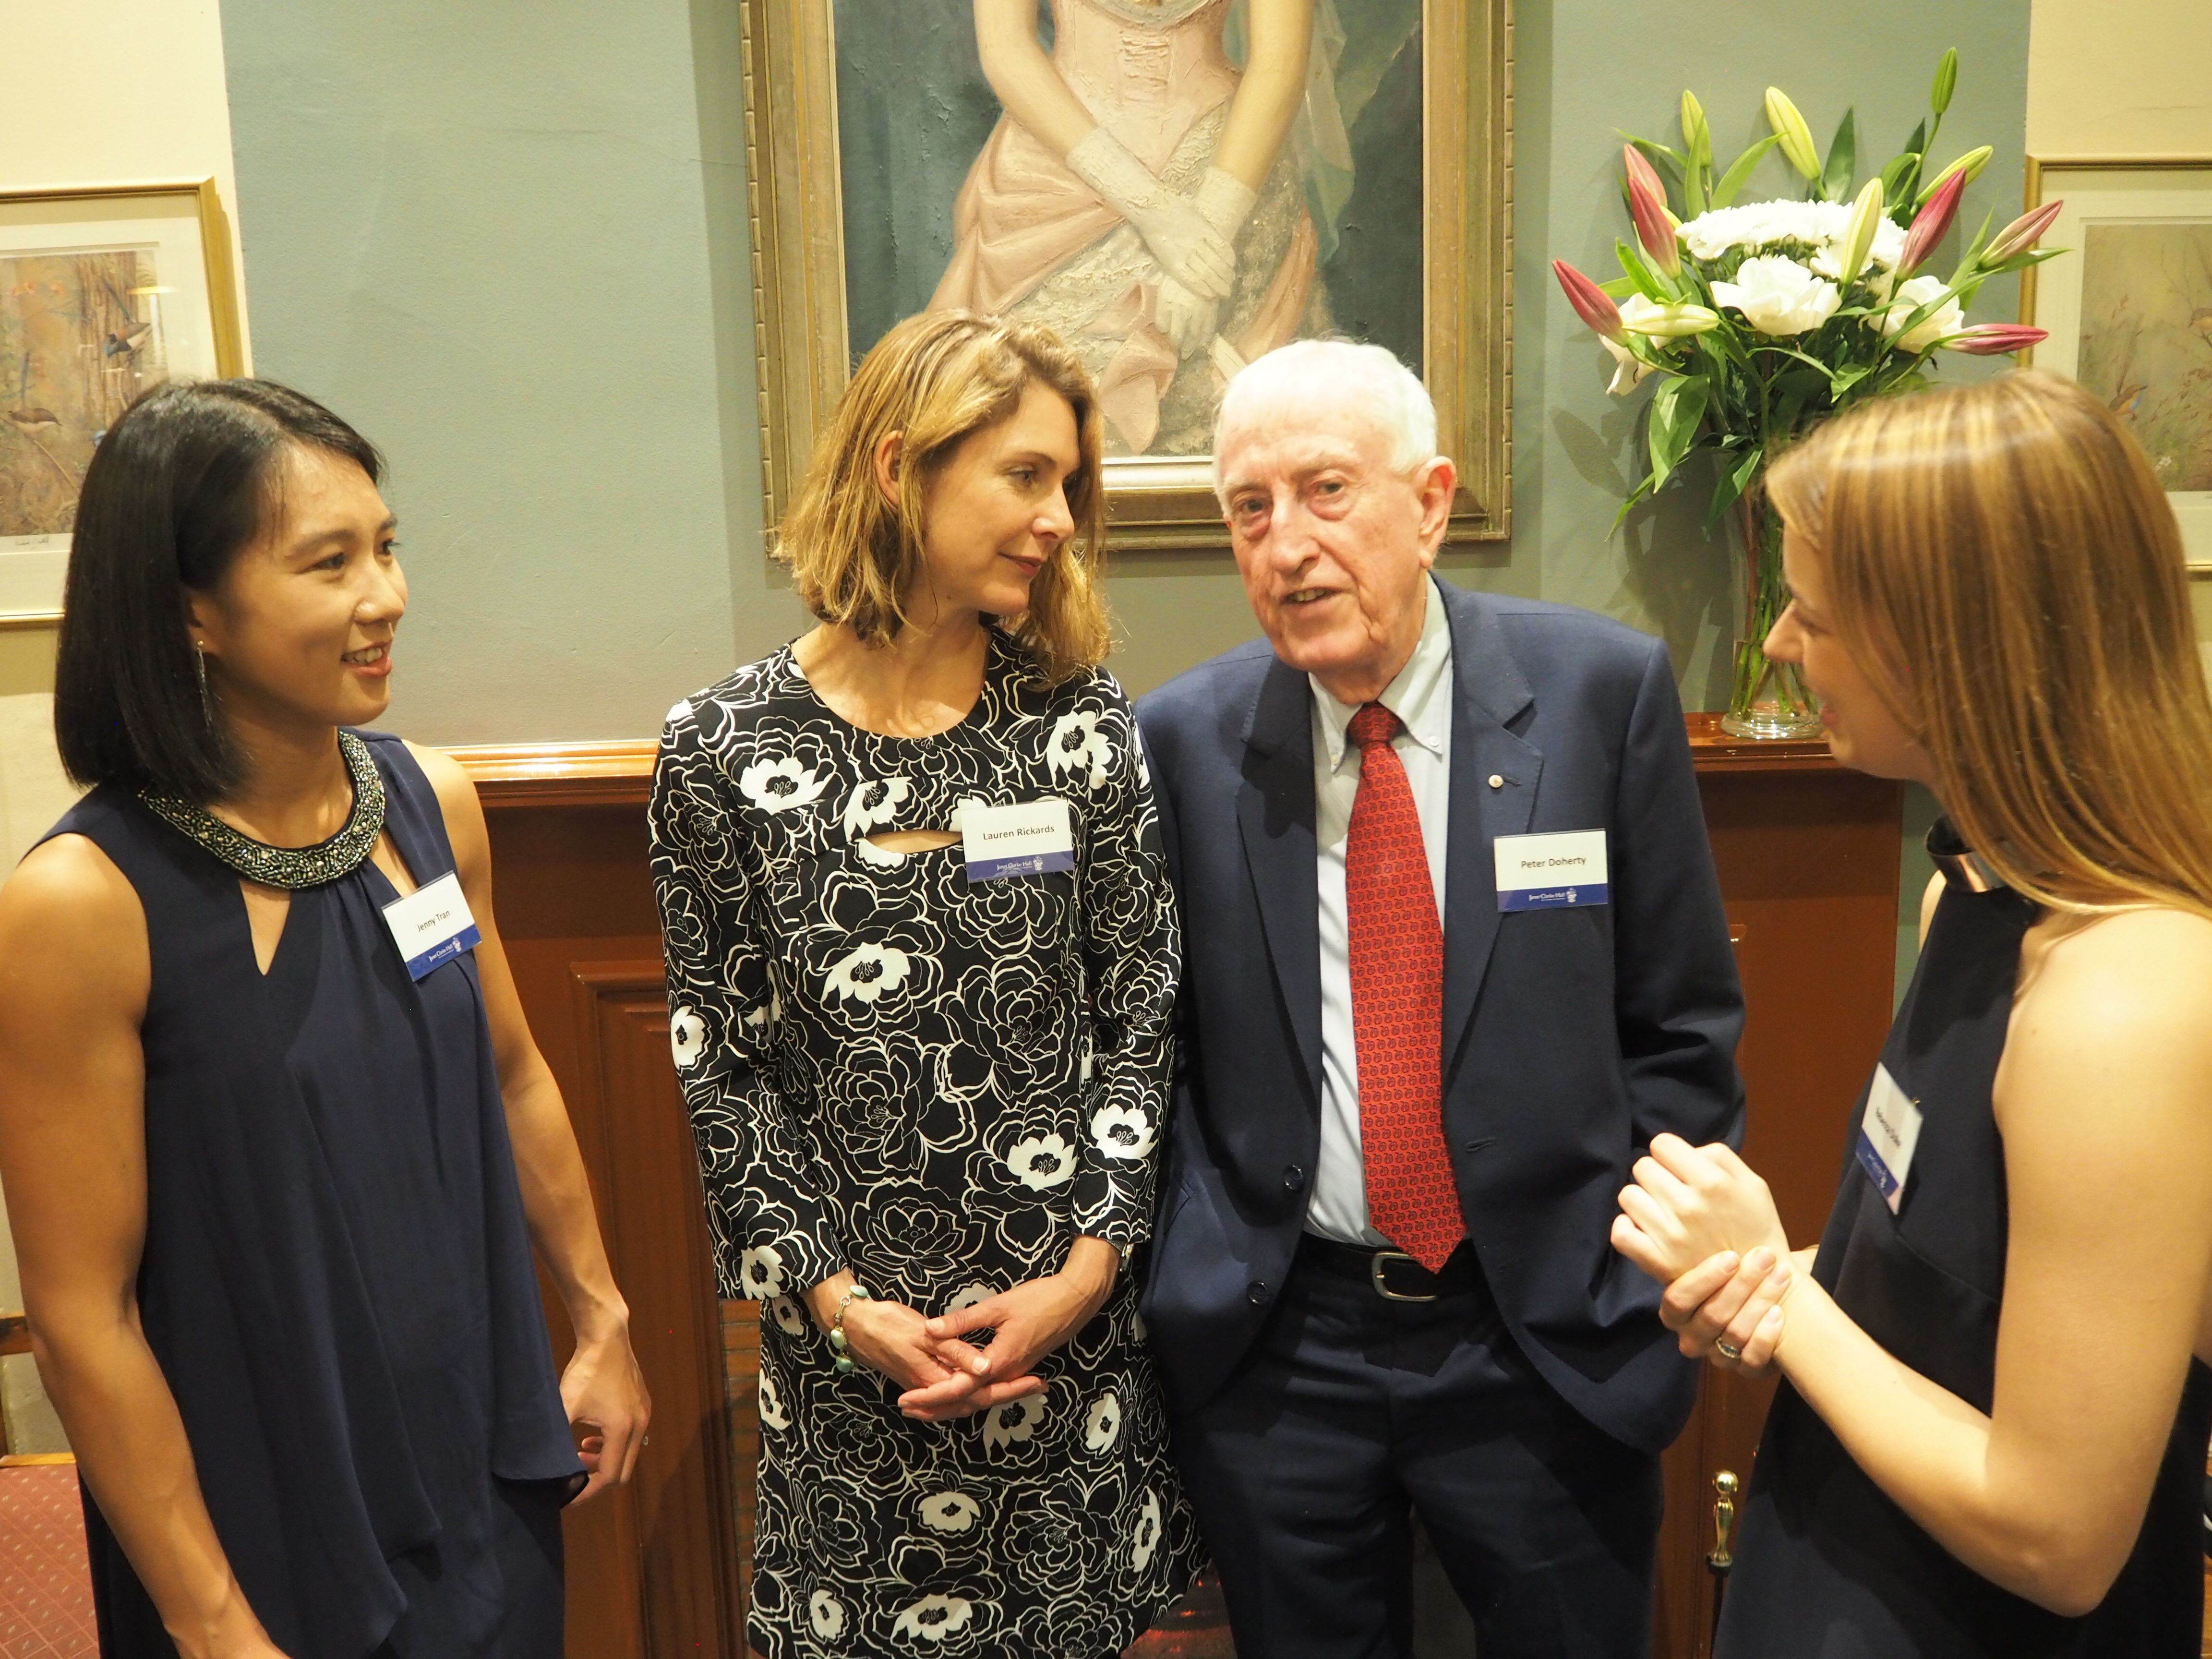 JCH Rhodes Scholars Jenny Tran, Lauren Rickards and Bec Duke talk with College Visitor and Nobel Laureate Peter Doherty at our Literature Dinner